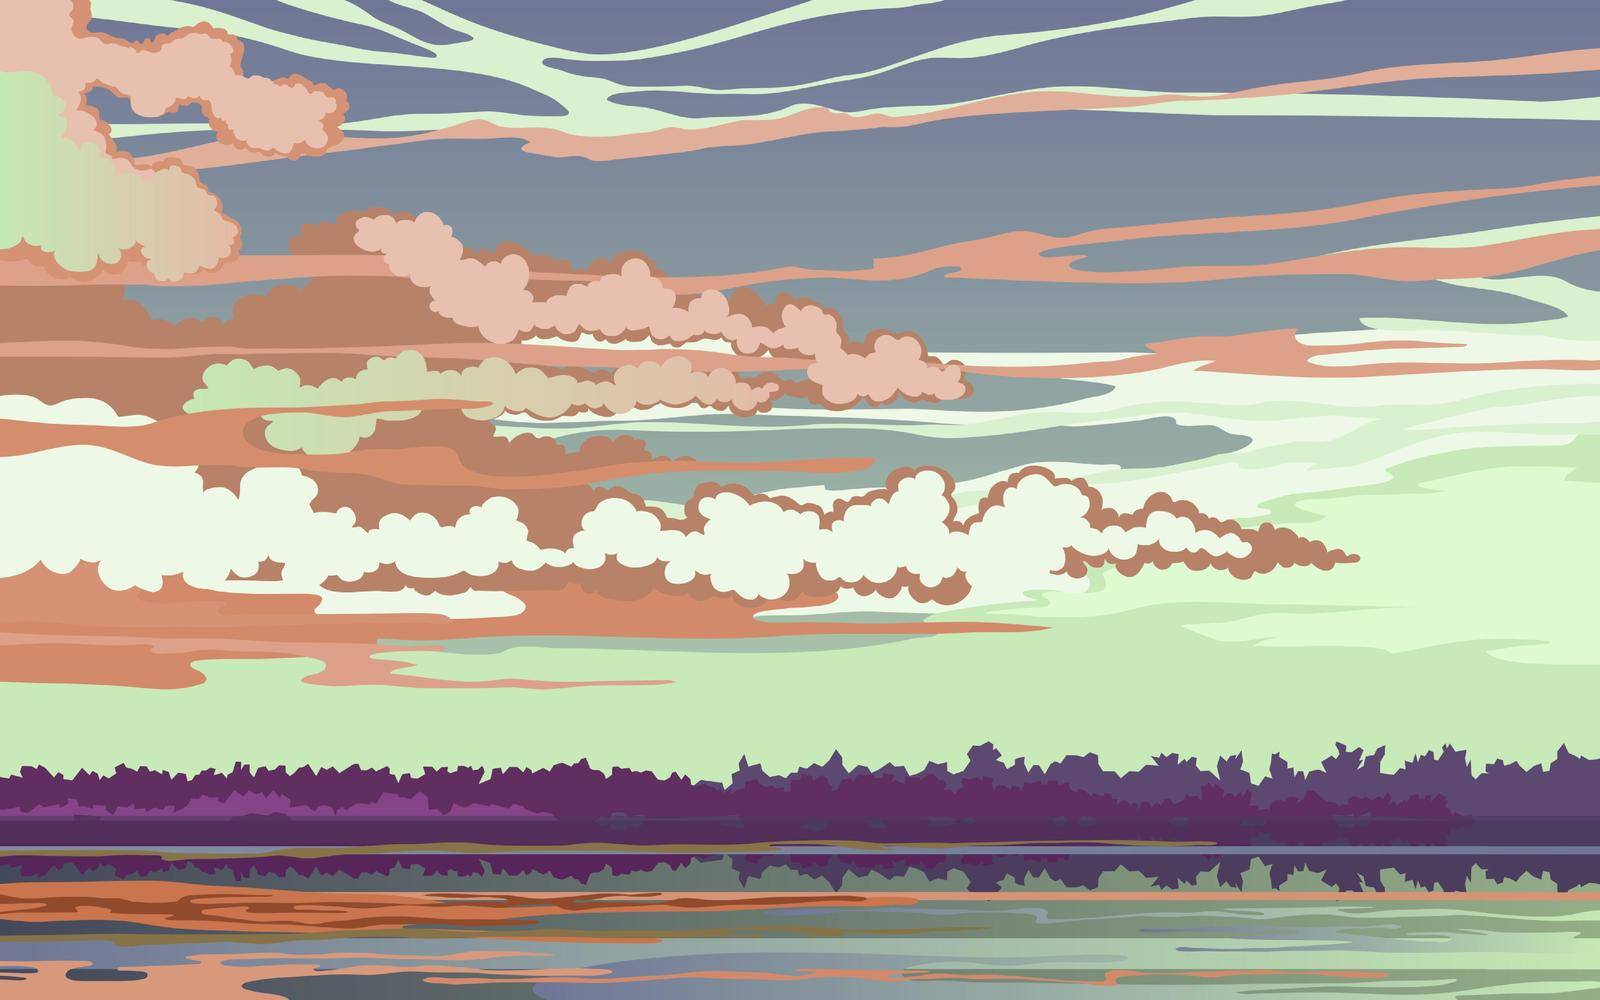 Stylized illustration, evening sunset landscape on the river. Sky with brown clouds on the horizon vector image of nature.